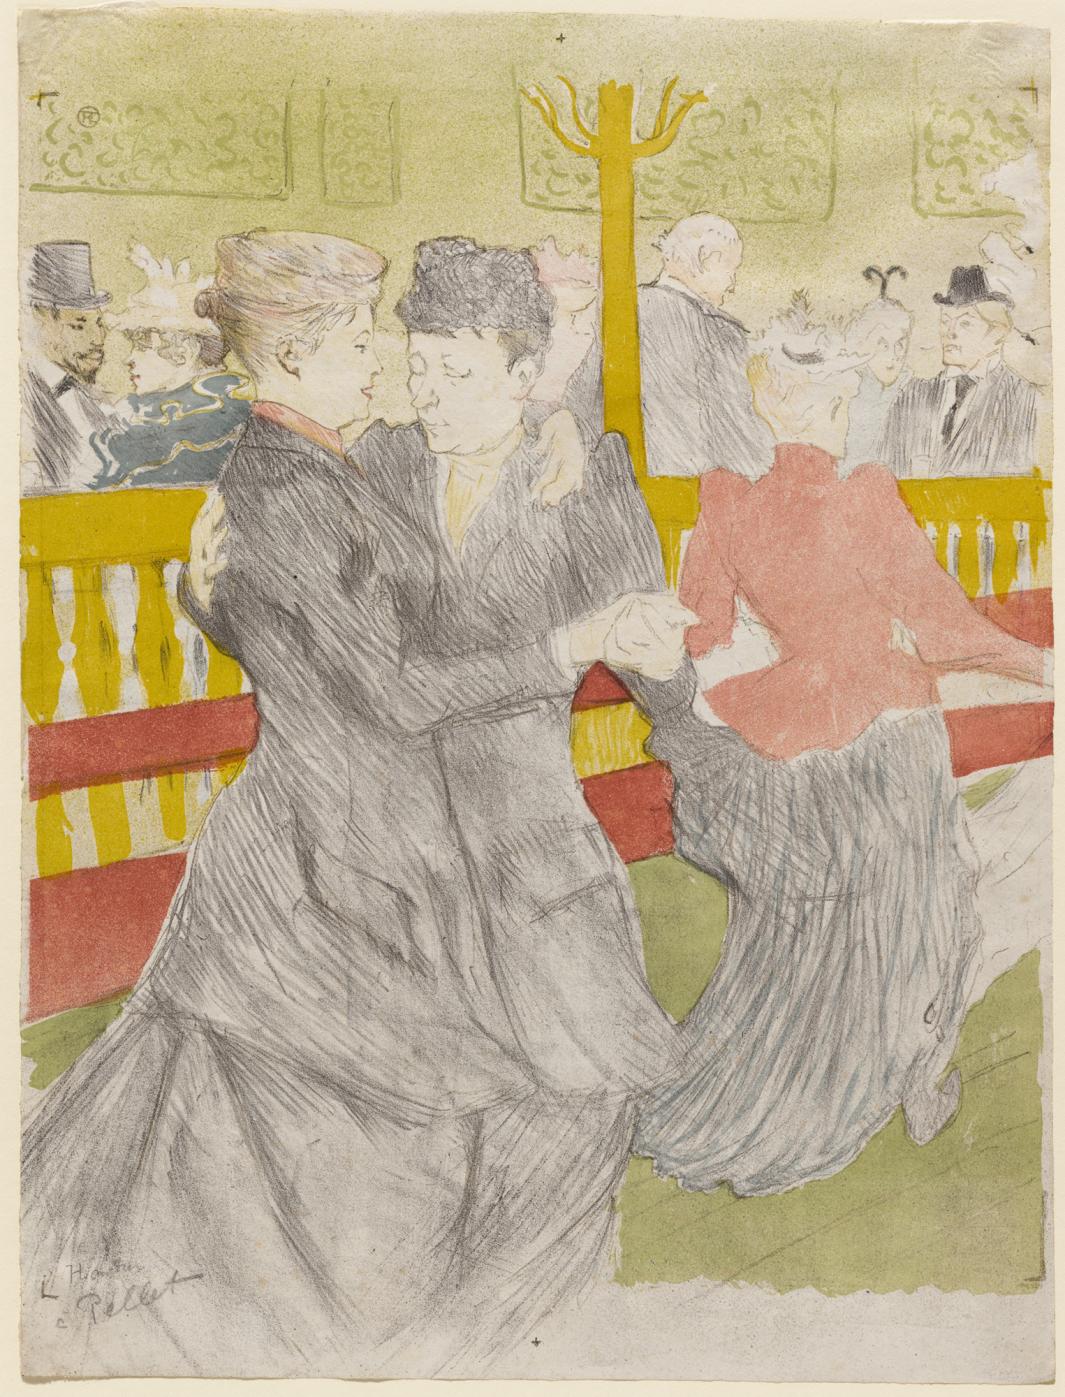 Color print of two women dancing together near another dancing couple, with other figures in the background